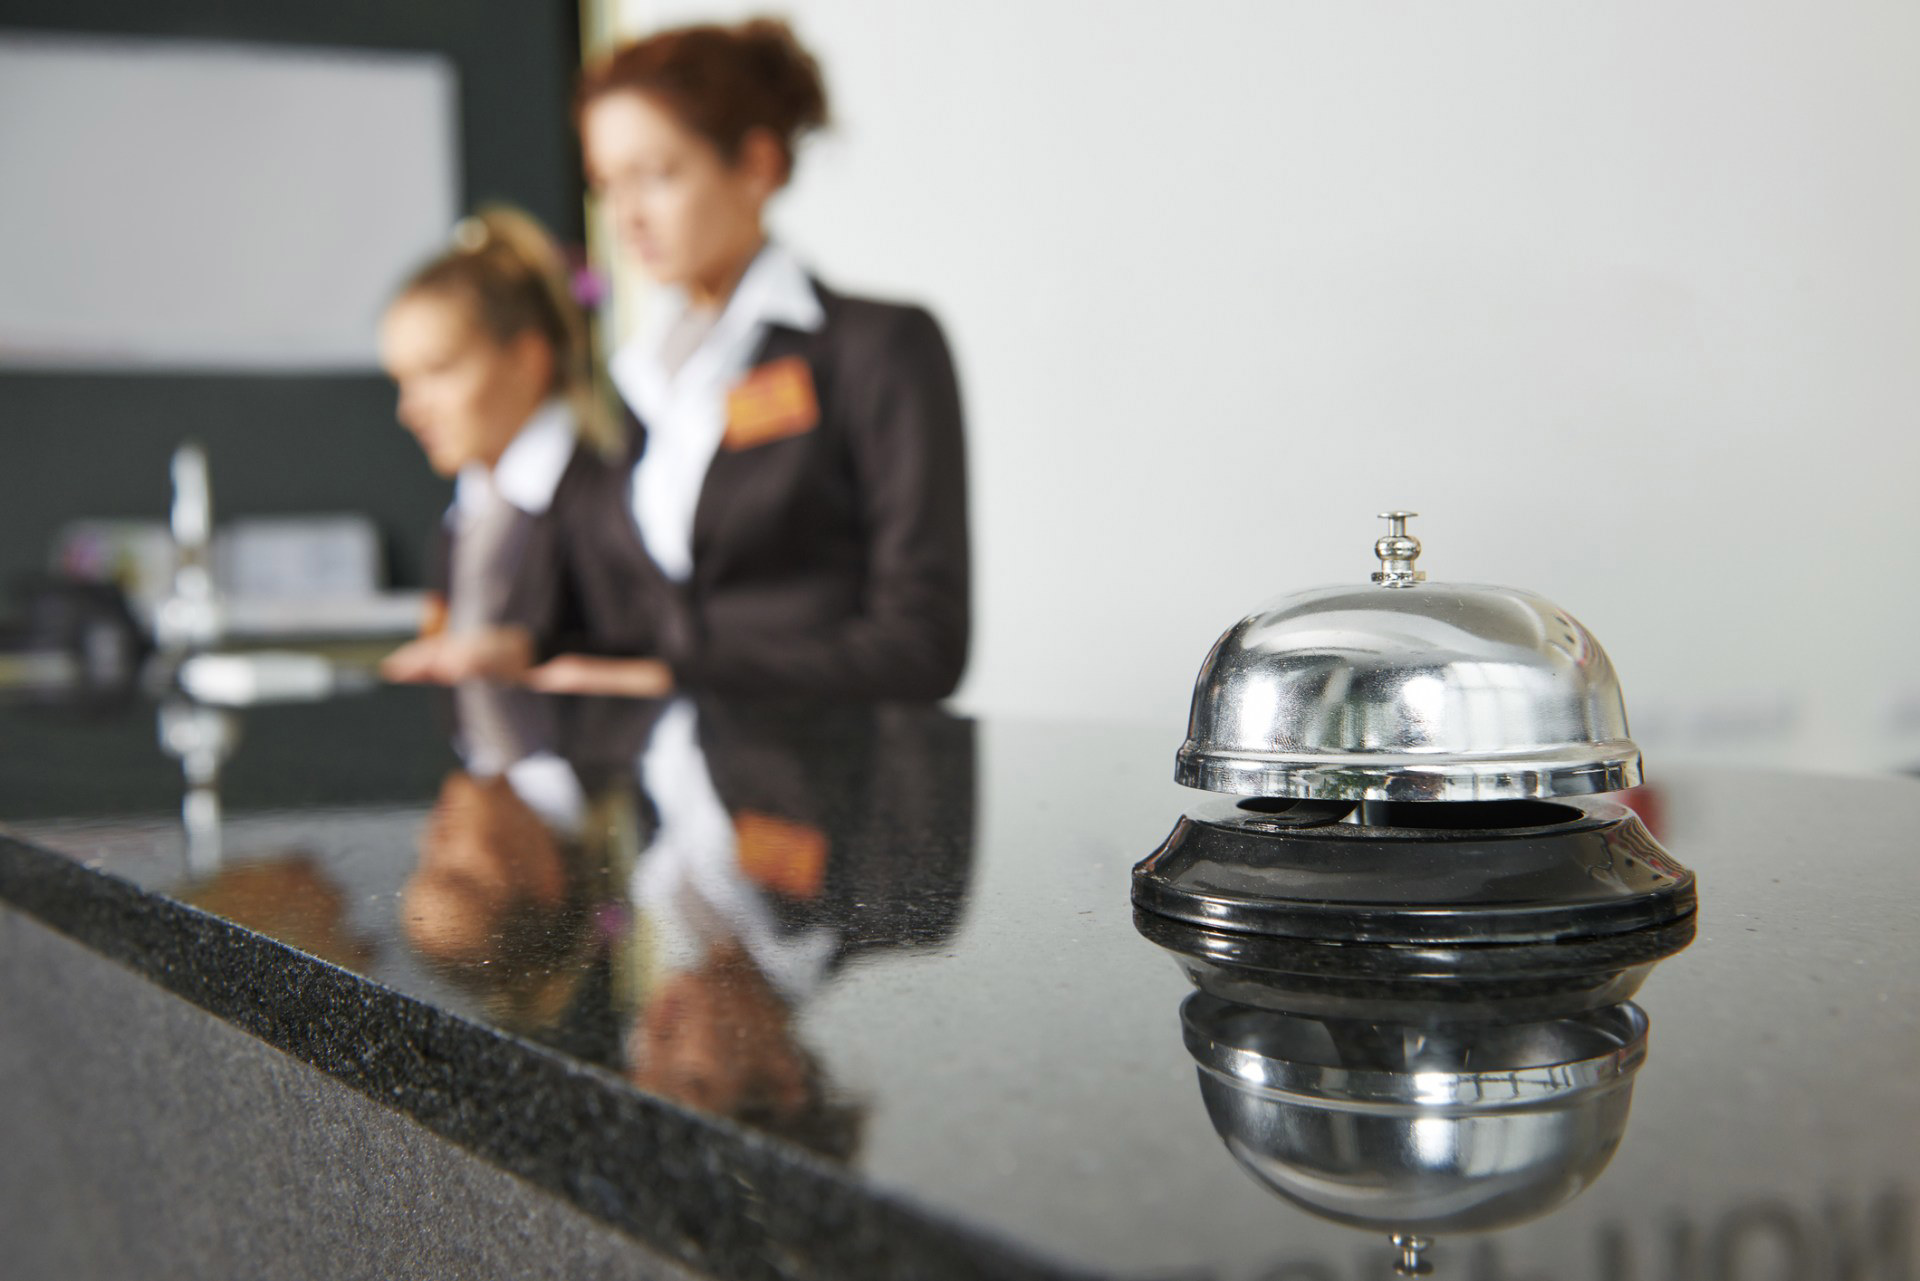 Hotel secrets: Ex-worker reveals how guests avoid paying their minibar bill, Travel News, Travel